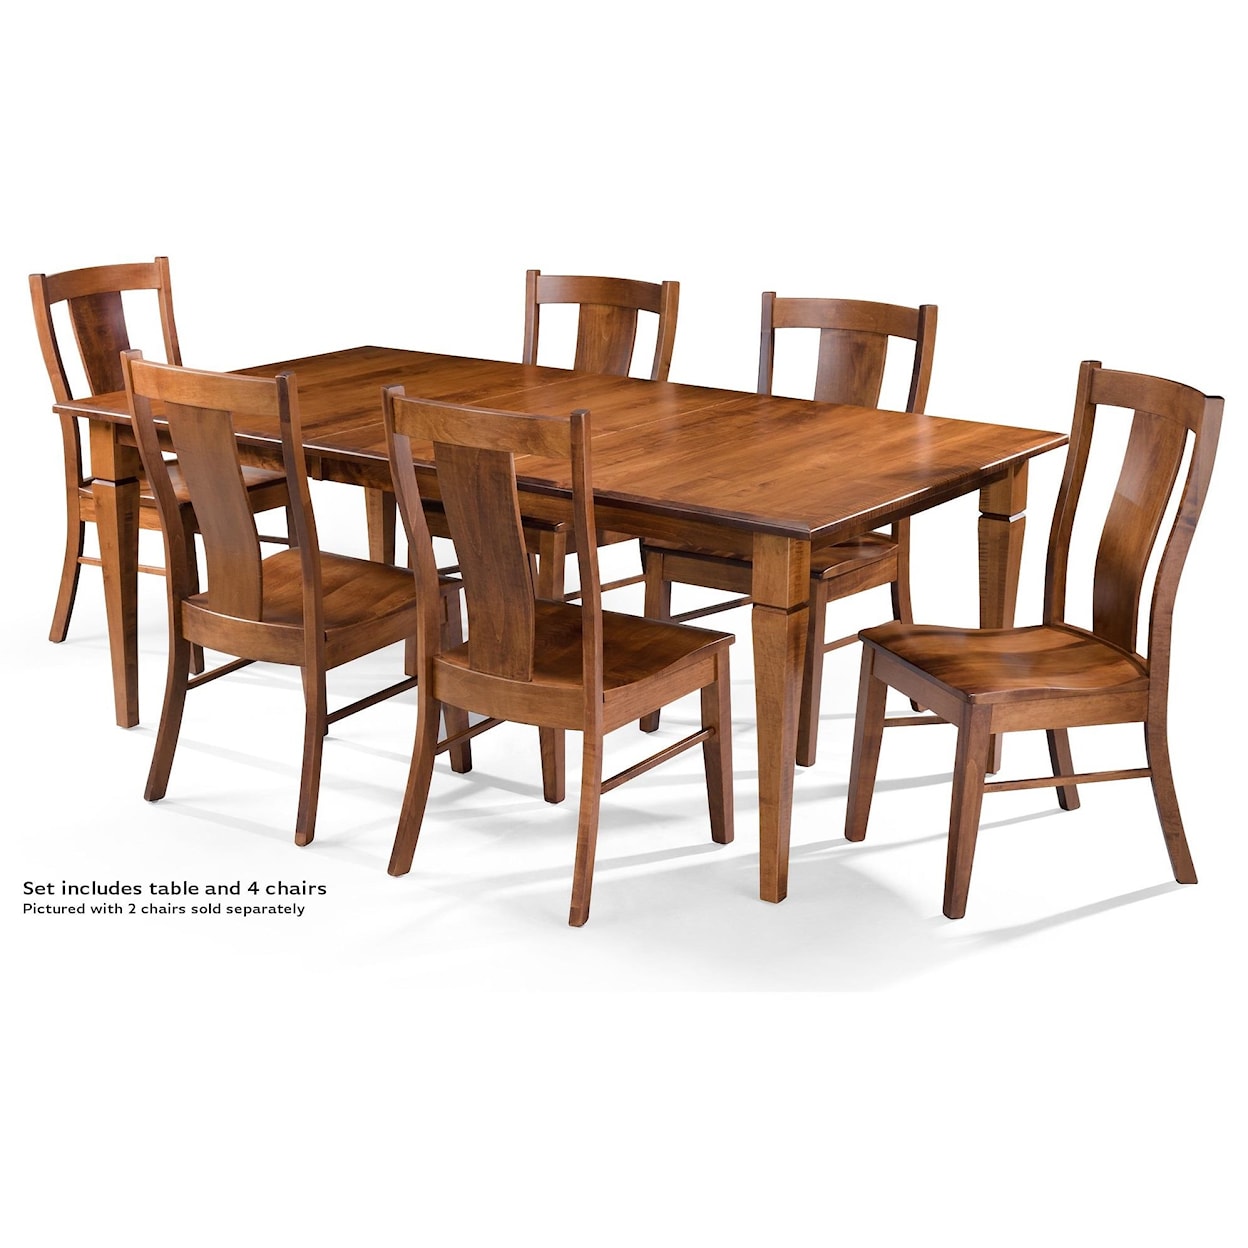 Archbold Furniture Amish Essentials Rectangle Dining Table and 4 chairs